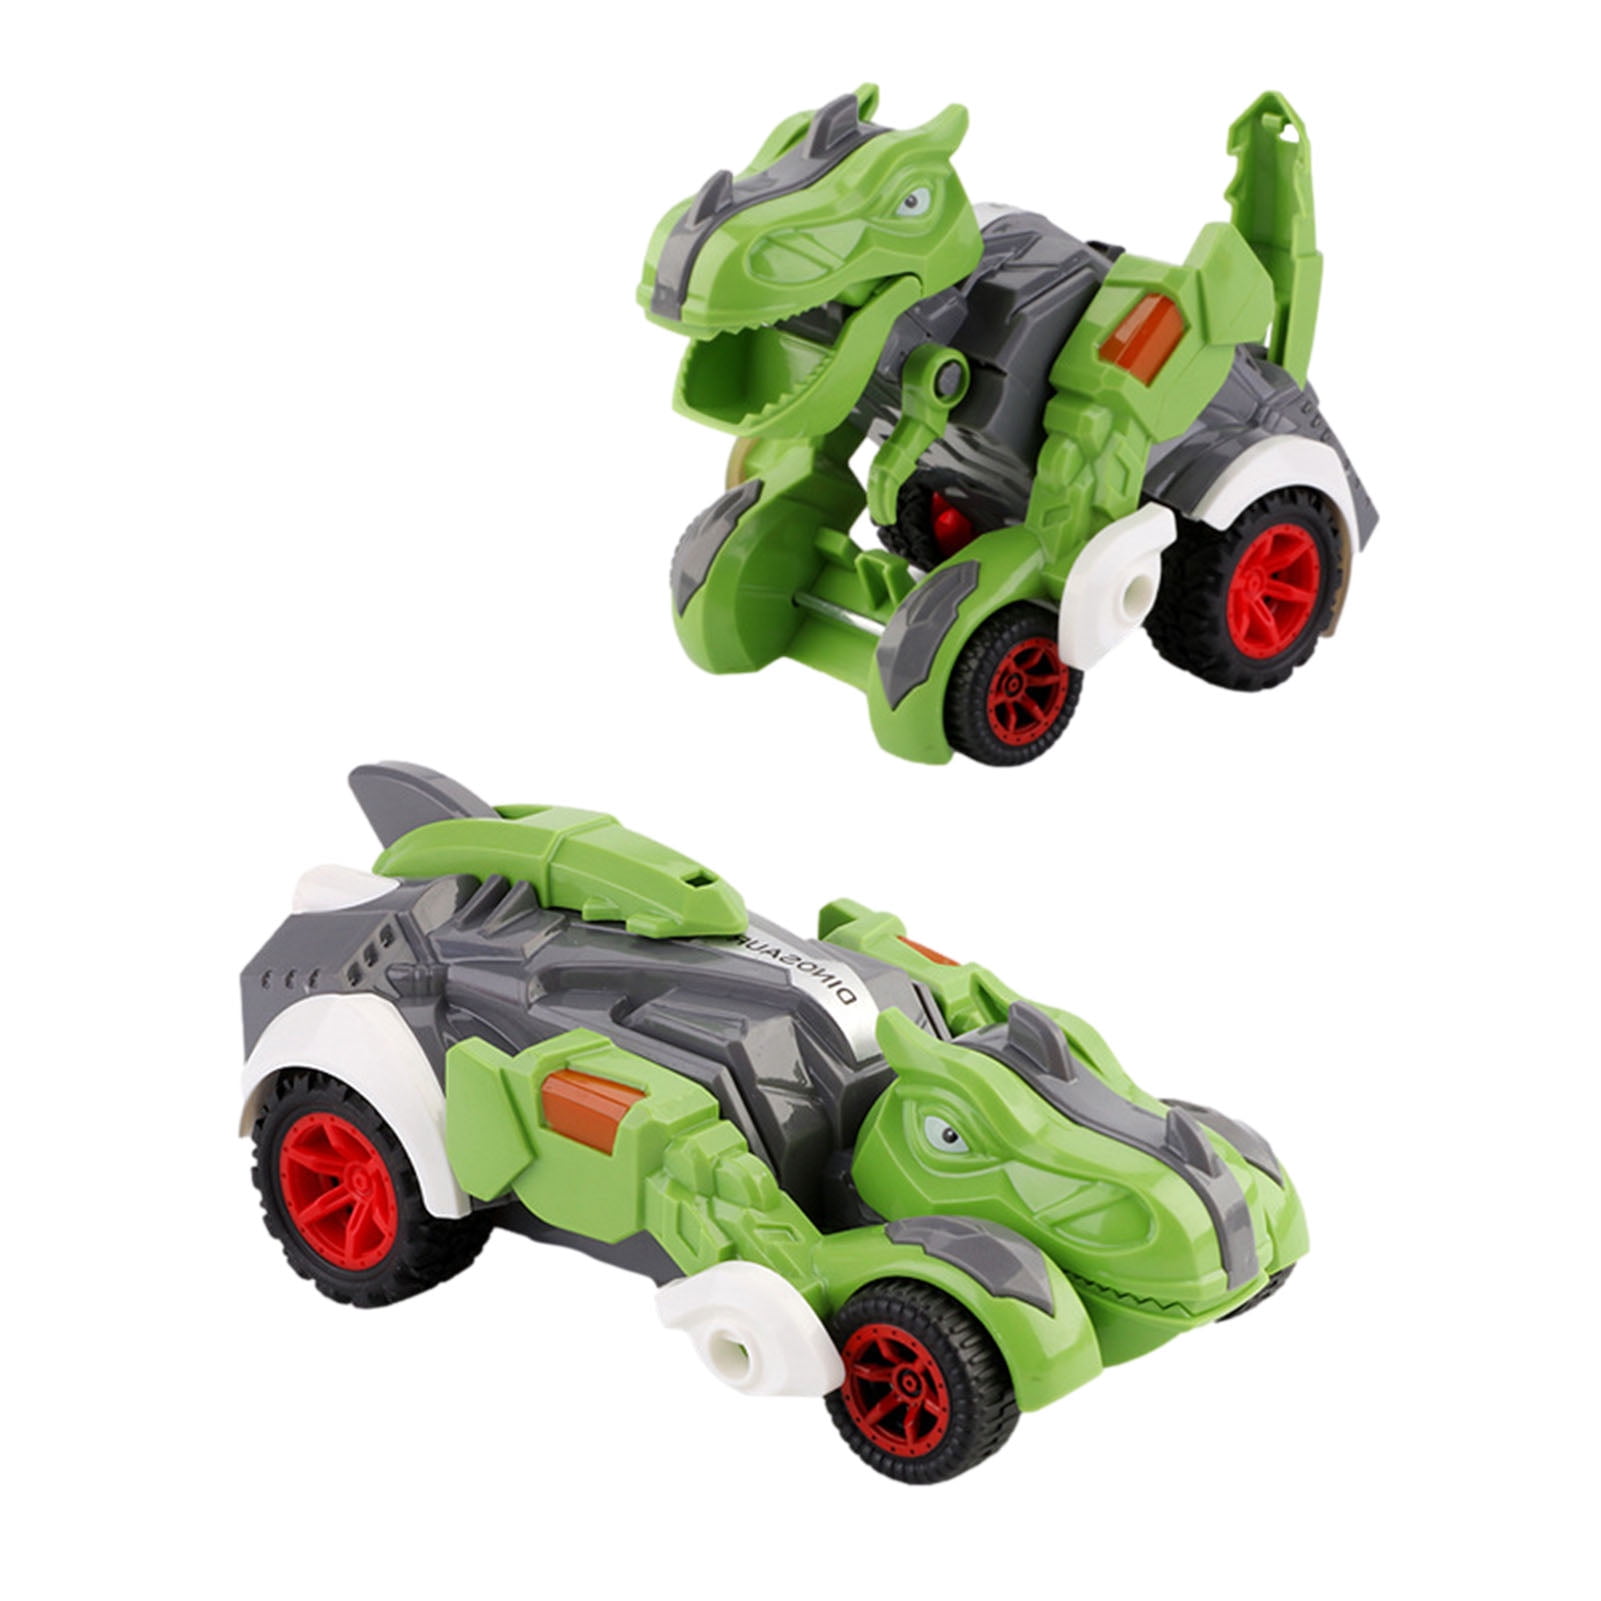 Ourine Transformer Dinosaur Car Omnidirectional Deformation Car Toy with Light Remote Control Car for Kids